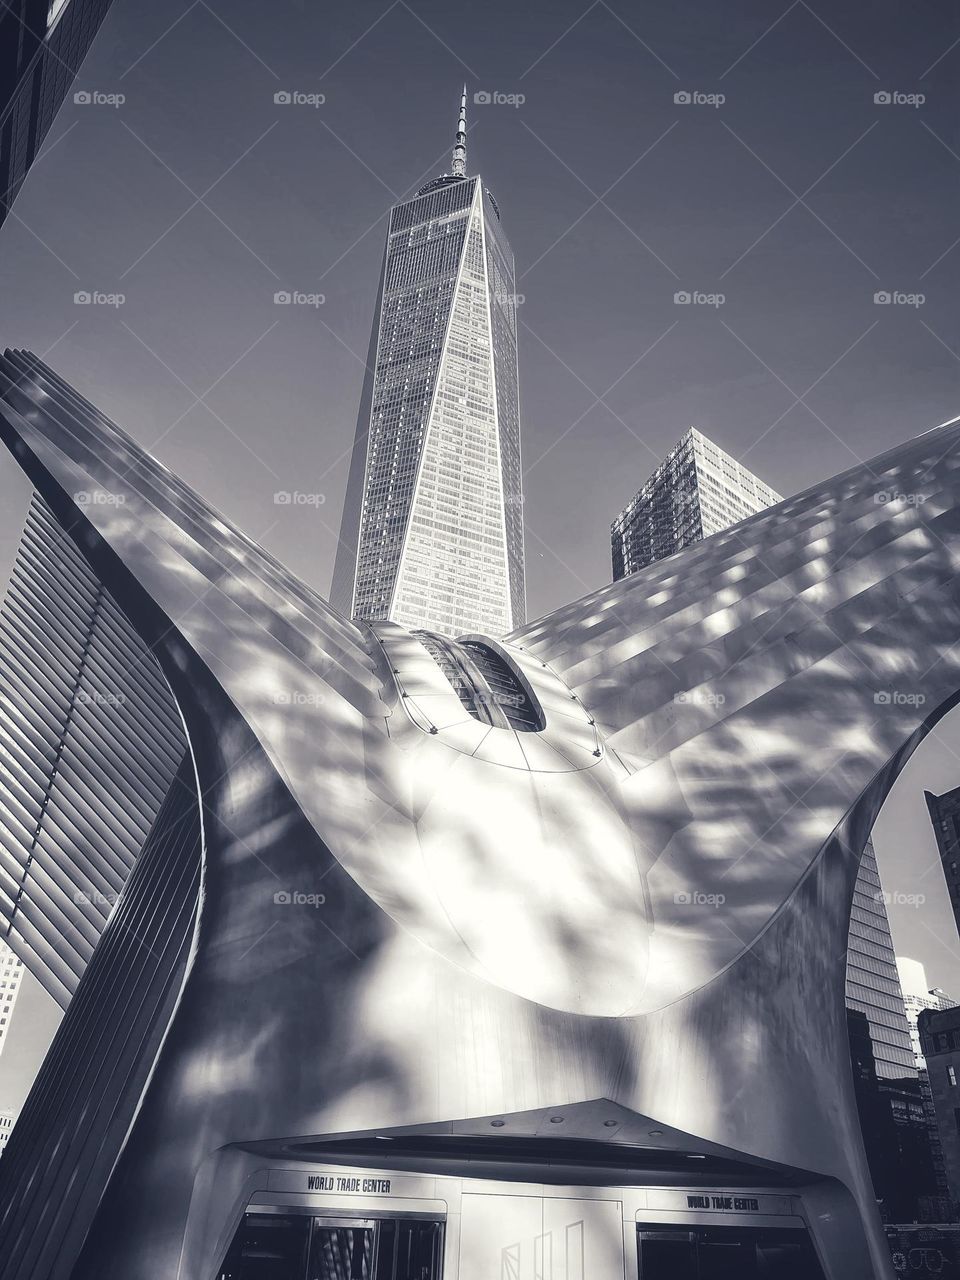 The Oculus and World Trade Center 